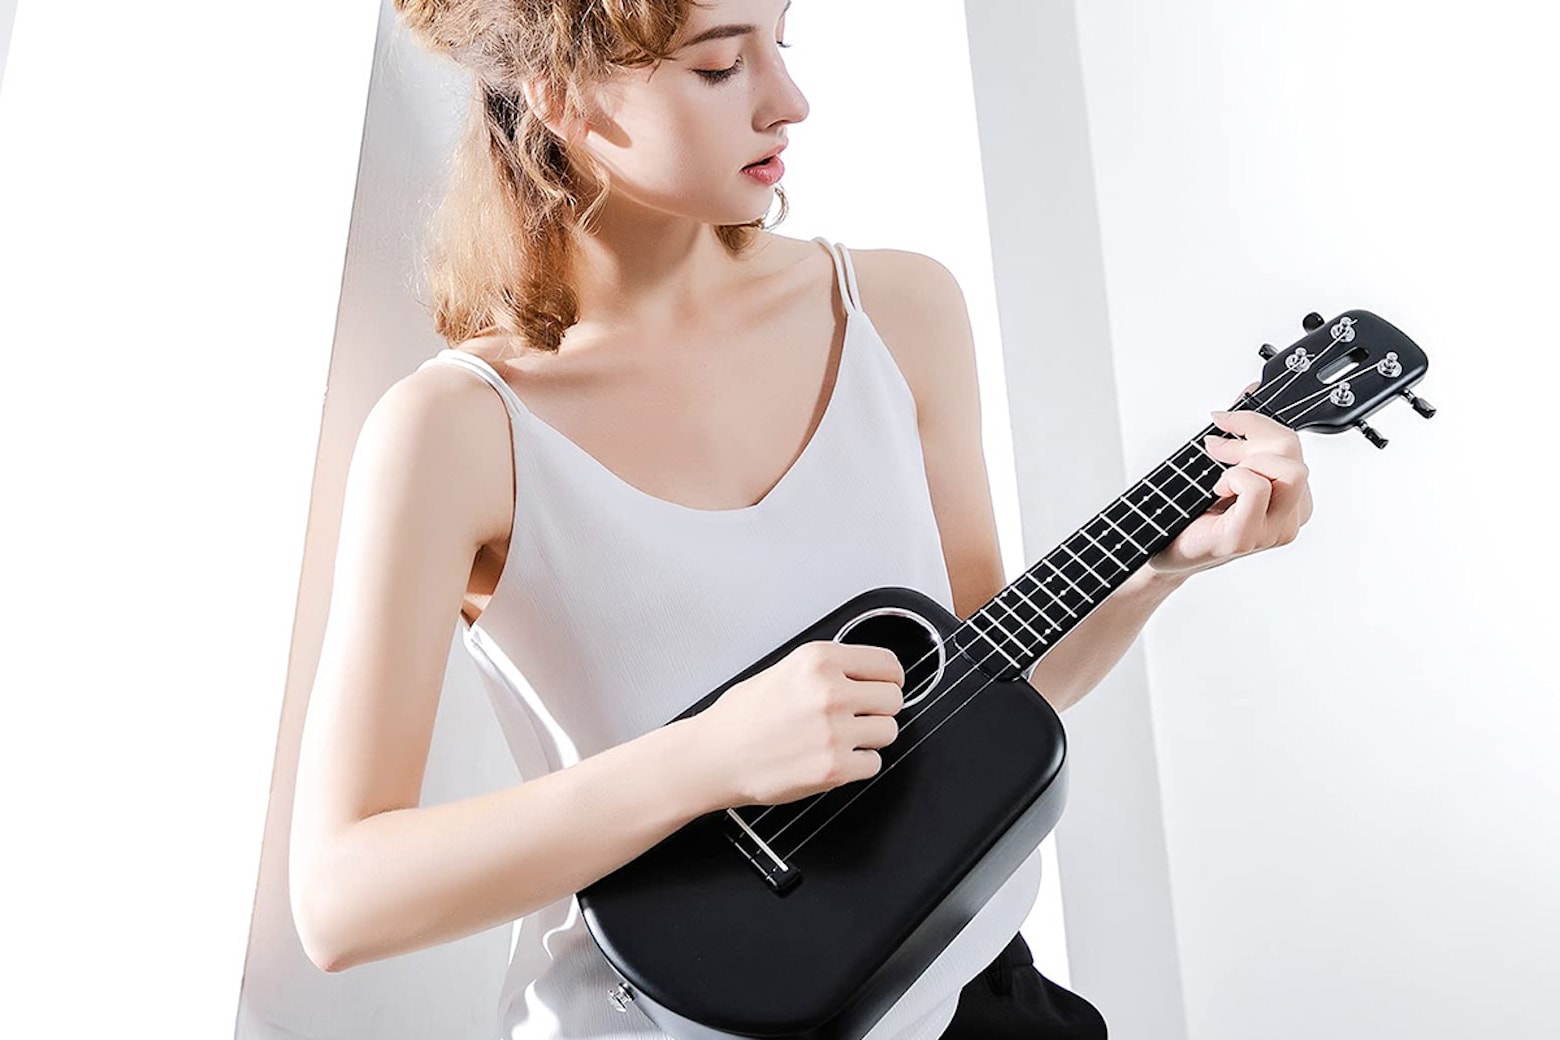 Let this smart ukulele teach you how to play for less than 0